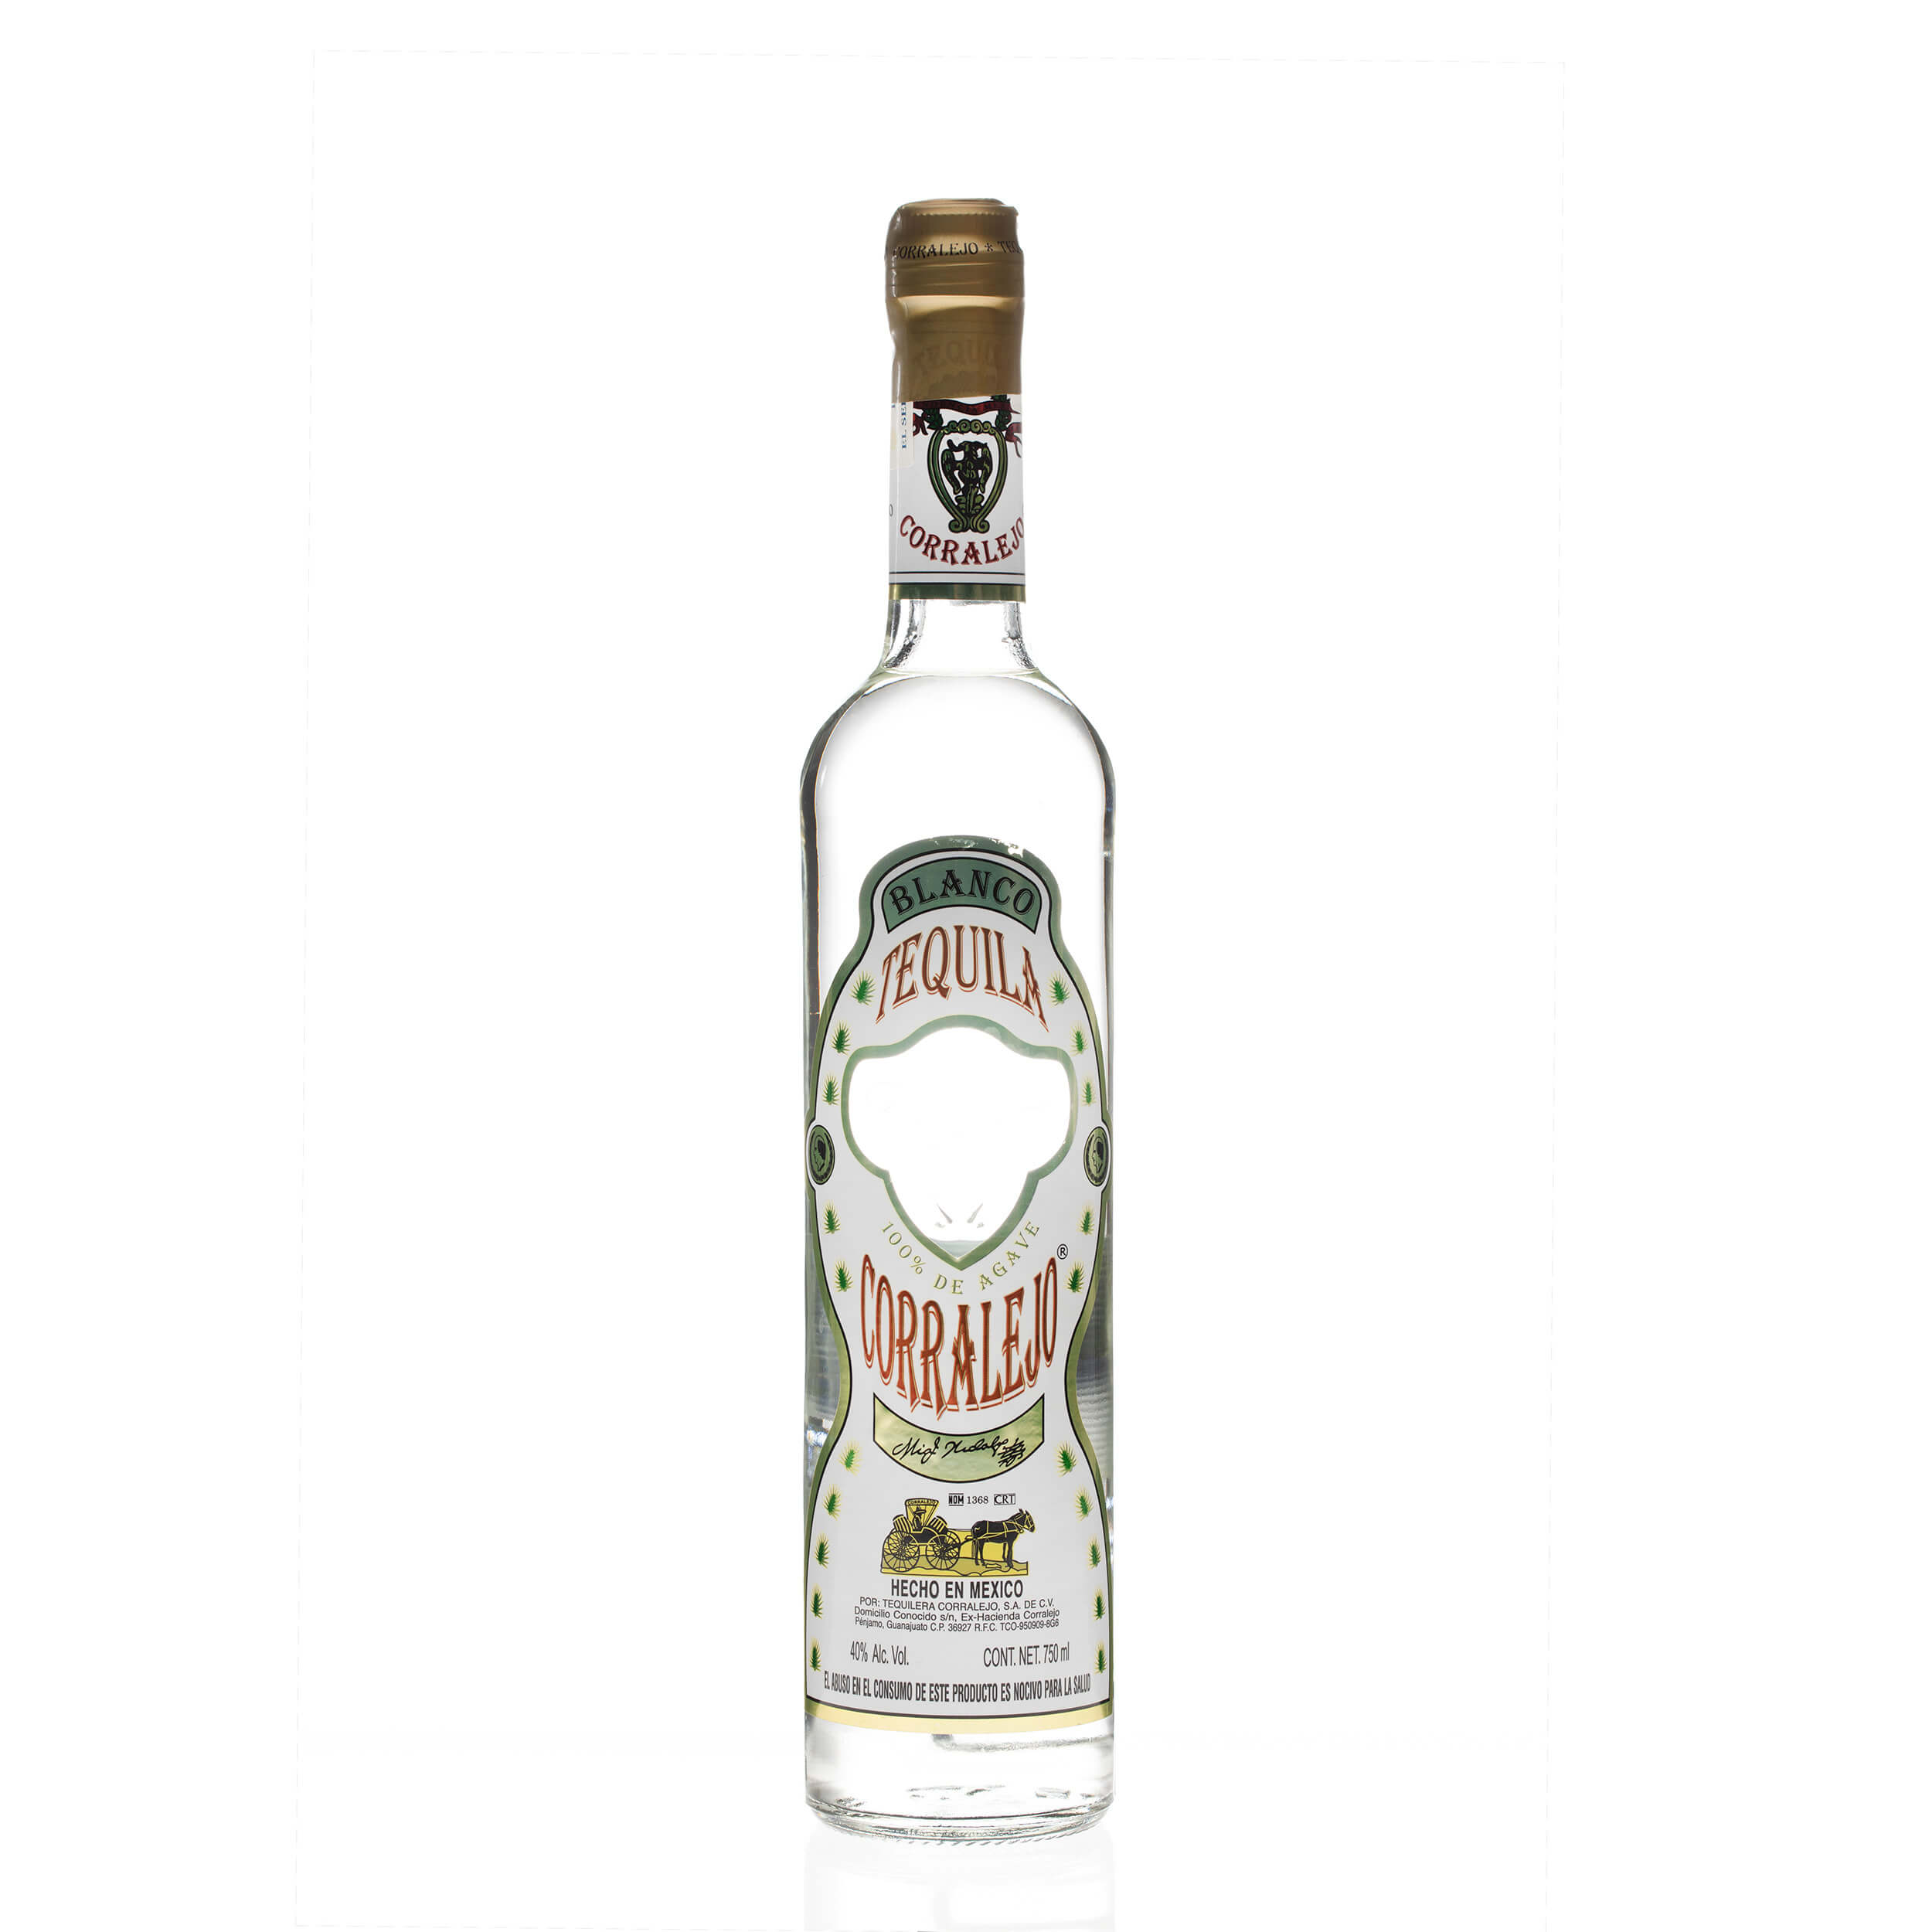 Product image for “Tequila Corralejo Blanco”